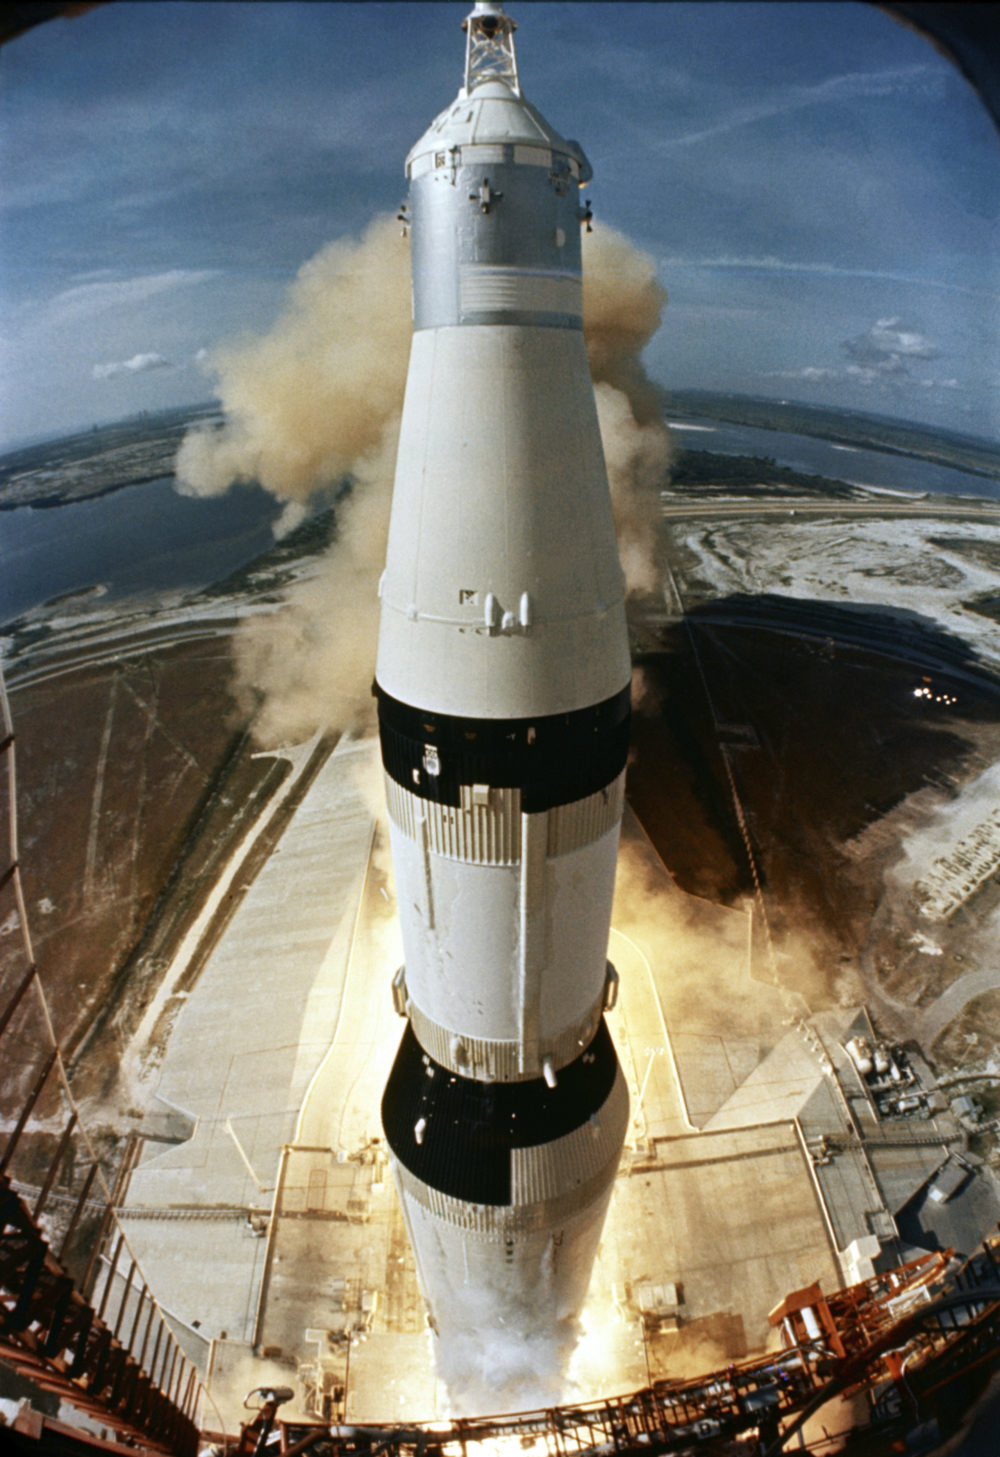 On July 16, 1969, the Saturn V rocket carrying the Apollo 11 crew launches at the Kennedy Space Center in Florida. (NASA via AP)